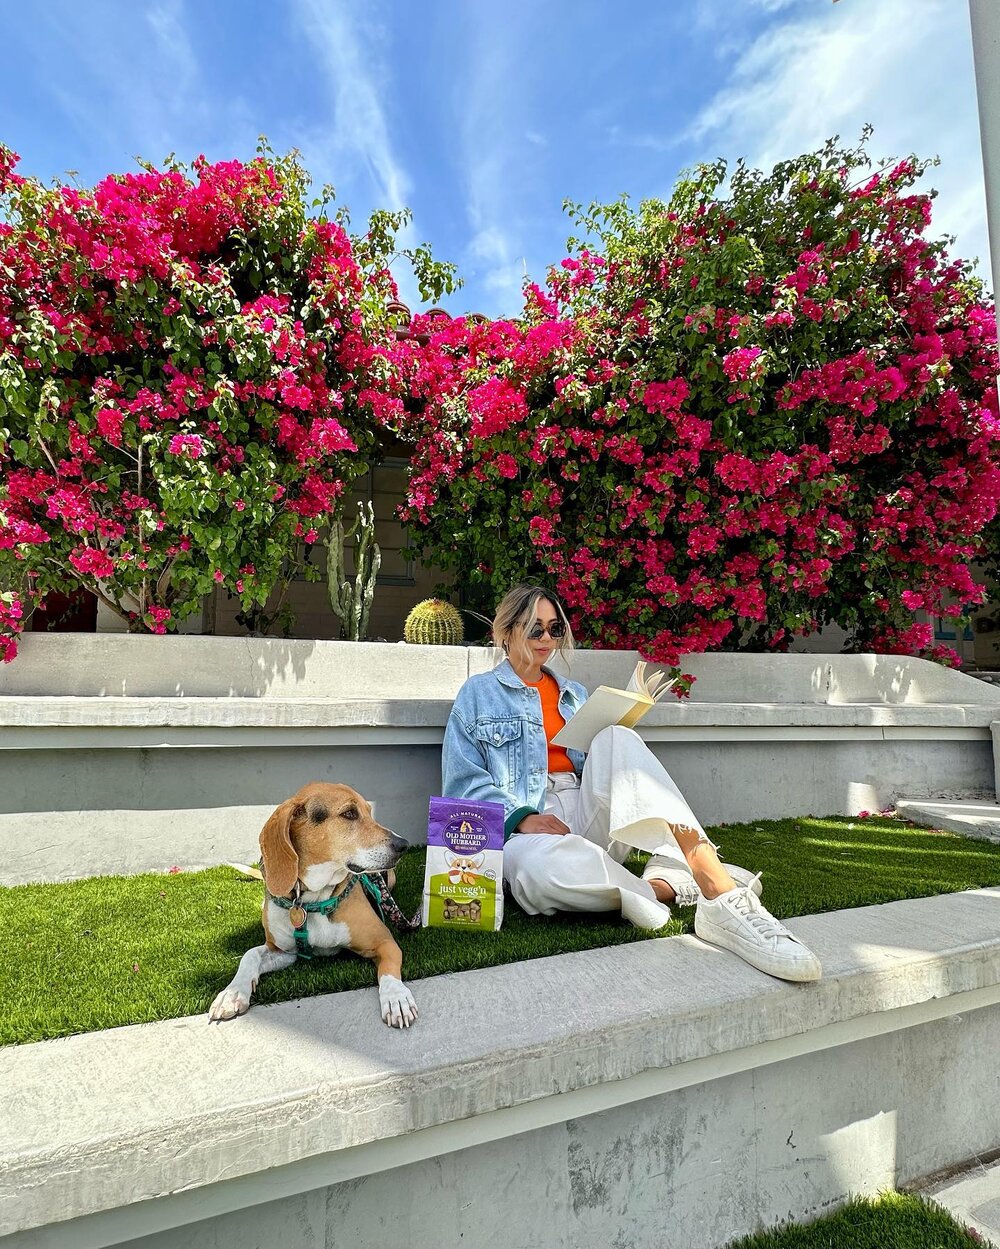 🌺 The best kind of spring day is spending it outdoors with our favorite things: a book for me and #OldMotherHubbardbyWellness dog treats for Stella. @wellnesspetfood #WellnessPetFoodPartner #WellnessPet